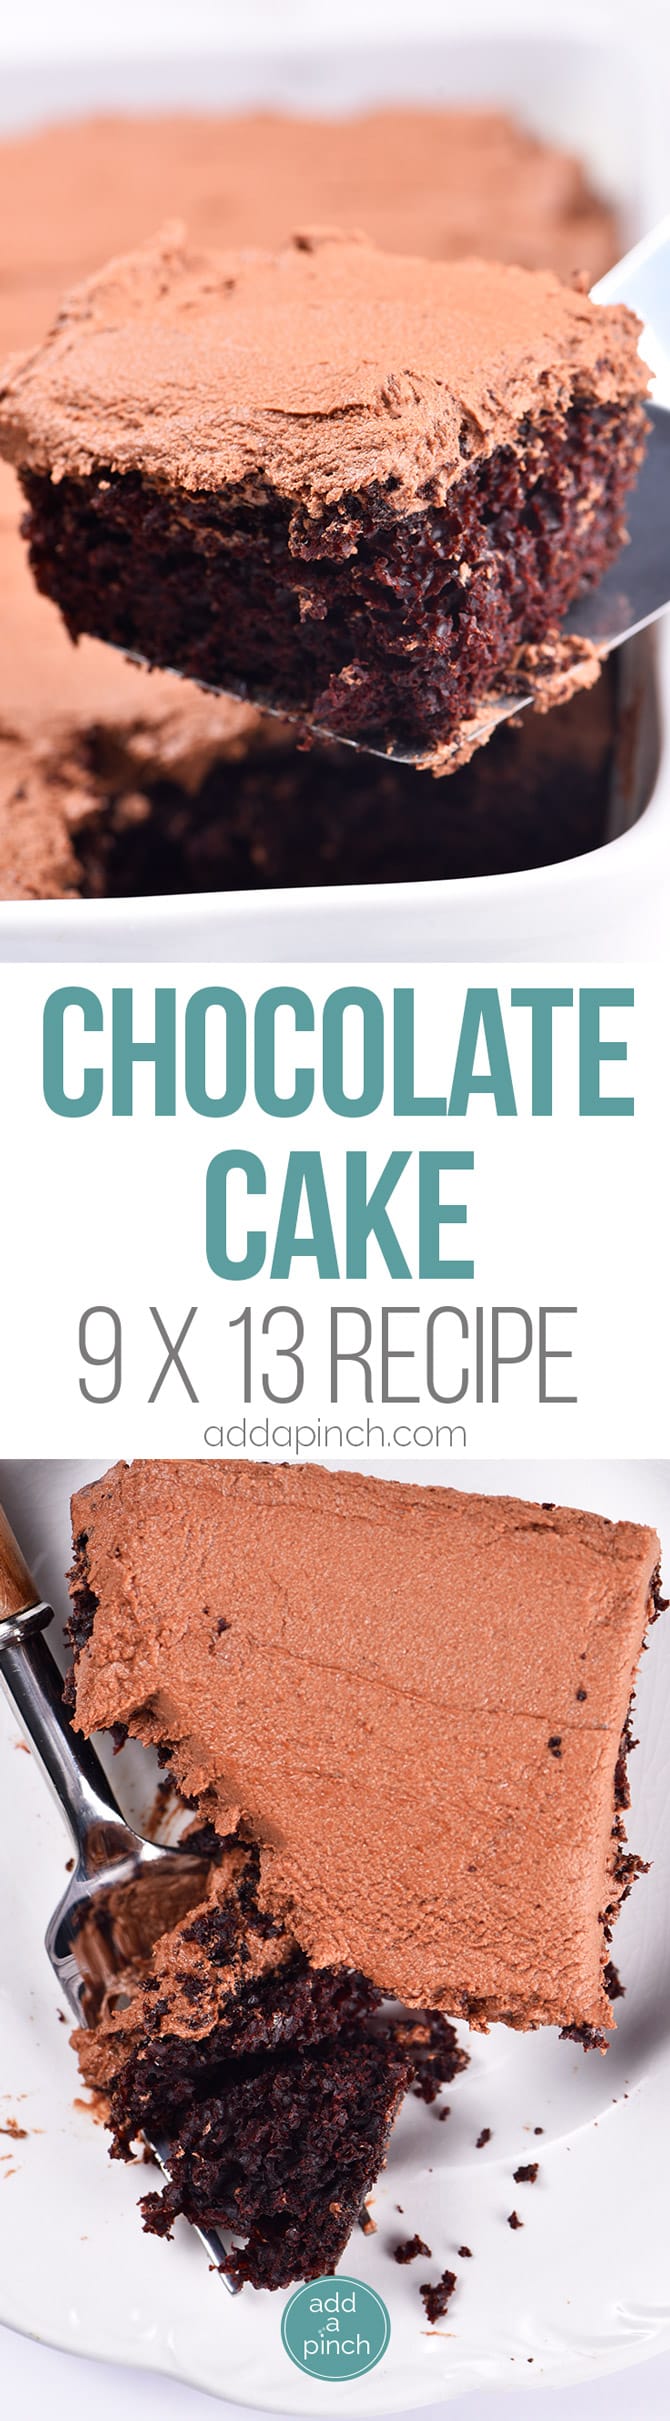 Best Chocolate Cake Recipe (9x13 Recipe) - This is the easiest 9x13 chocolate cake recipe I've ever made. Adjusted from my Best Chocolate Cake that everyone absolutely loves, I've now made the cake even easier and sized for a 9x13 sheet cake! // addapinch.com